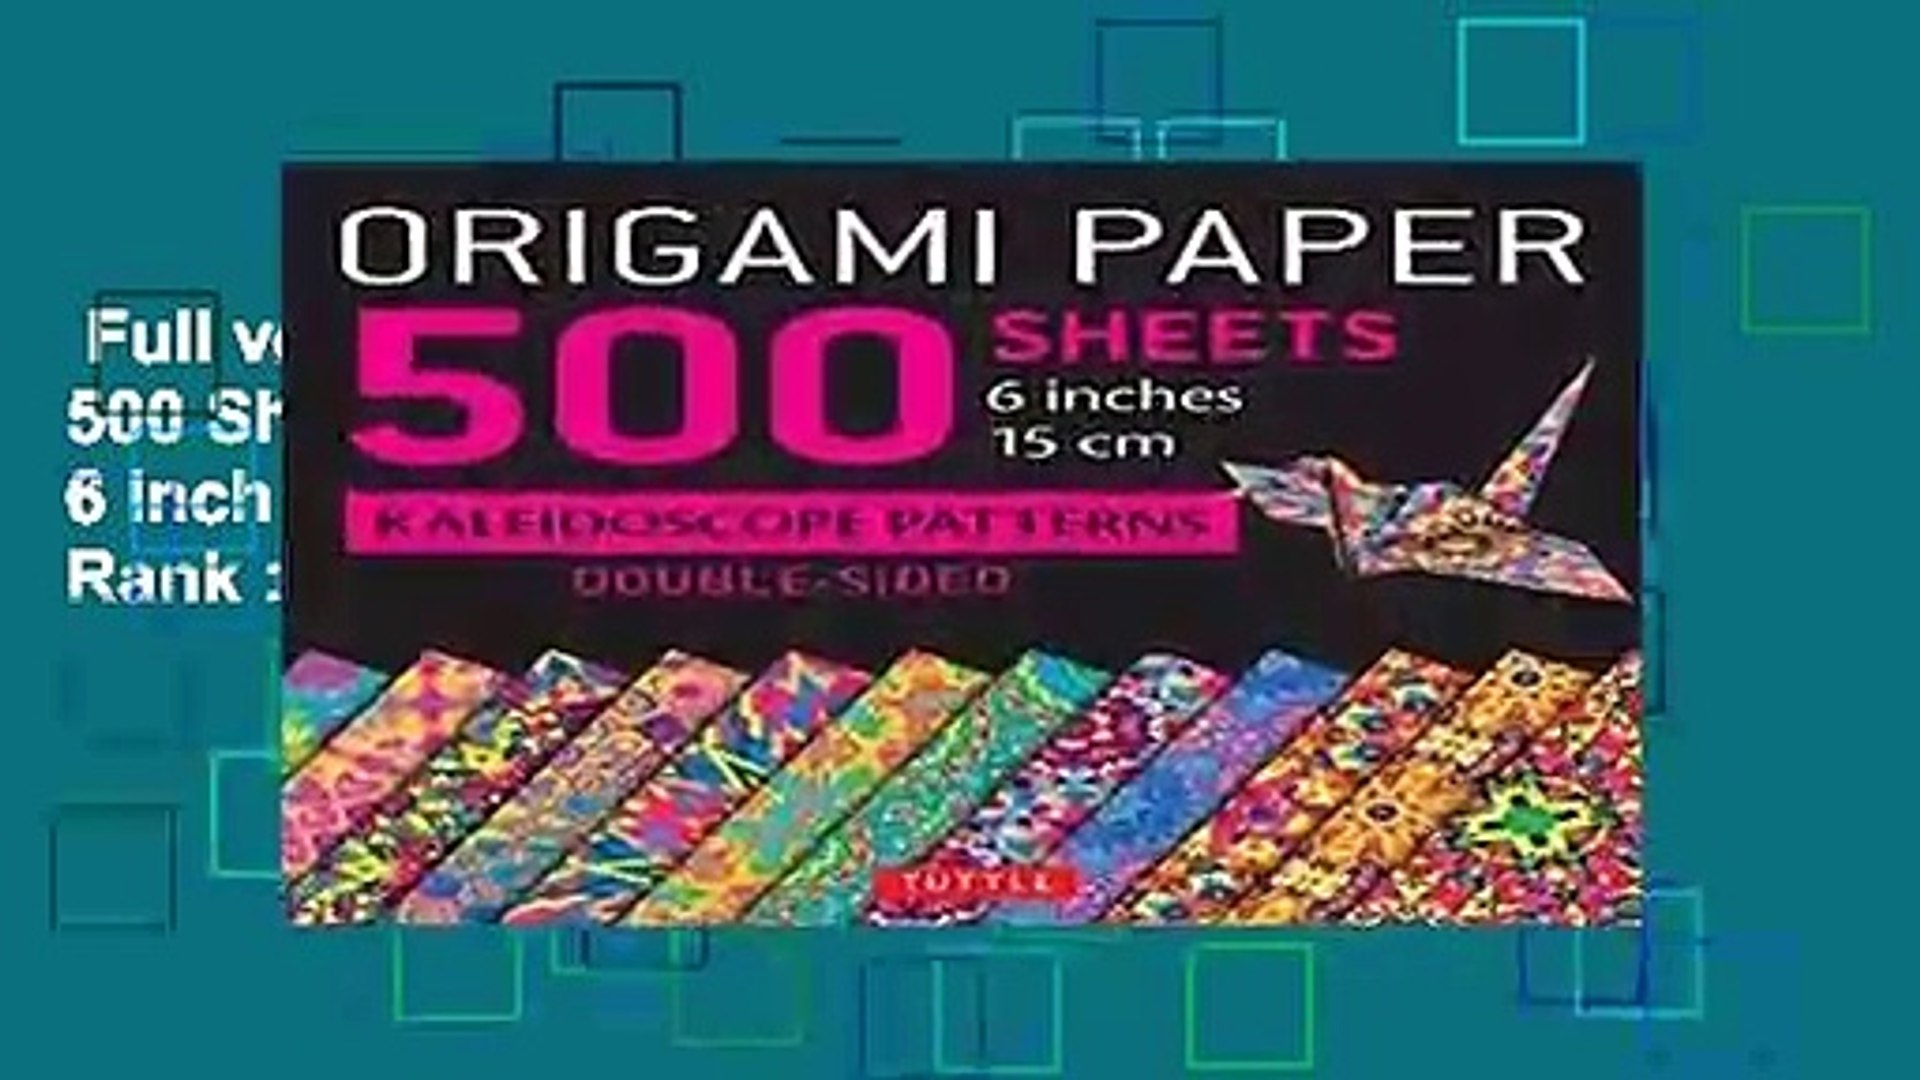 Full Version Origami Paper 500 Sheets Kaleidoscope Patterns 6 Inch 15 Cm Best Sellers Rank 1 Video Dailymotion